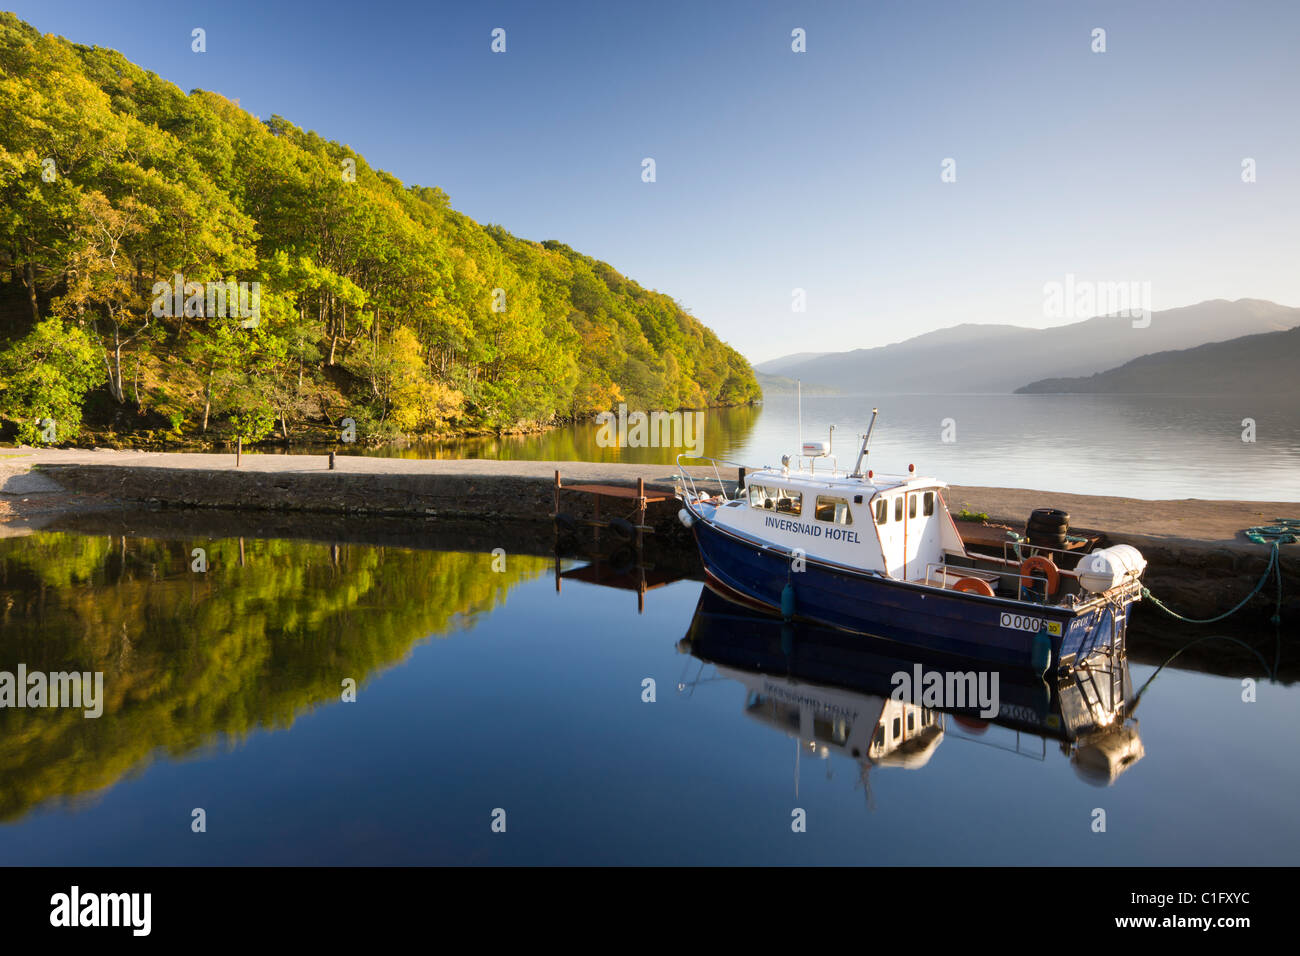 Boat moored in the small Inversnaid Hotel harbour on Loch Lomond, Loch Lomond and The Trossachs National Park, Scotland Stock Photo